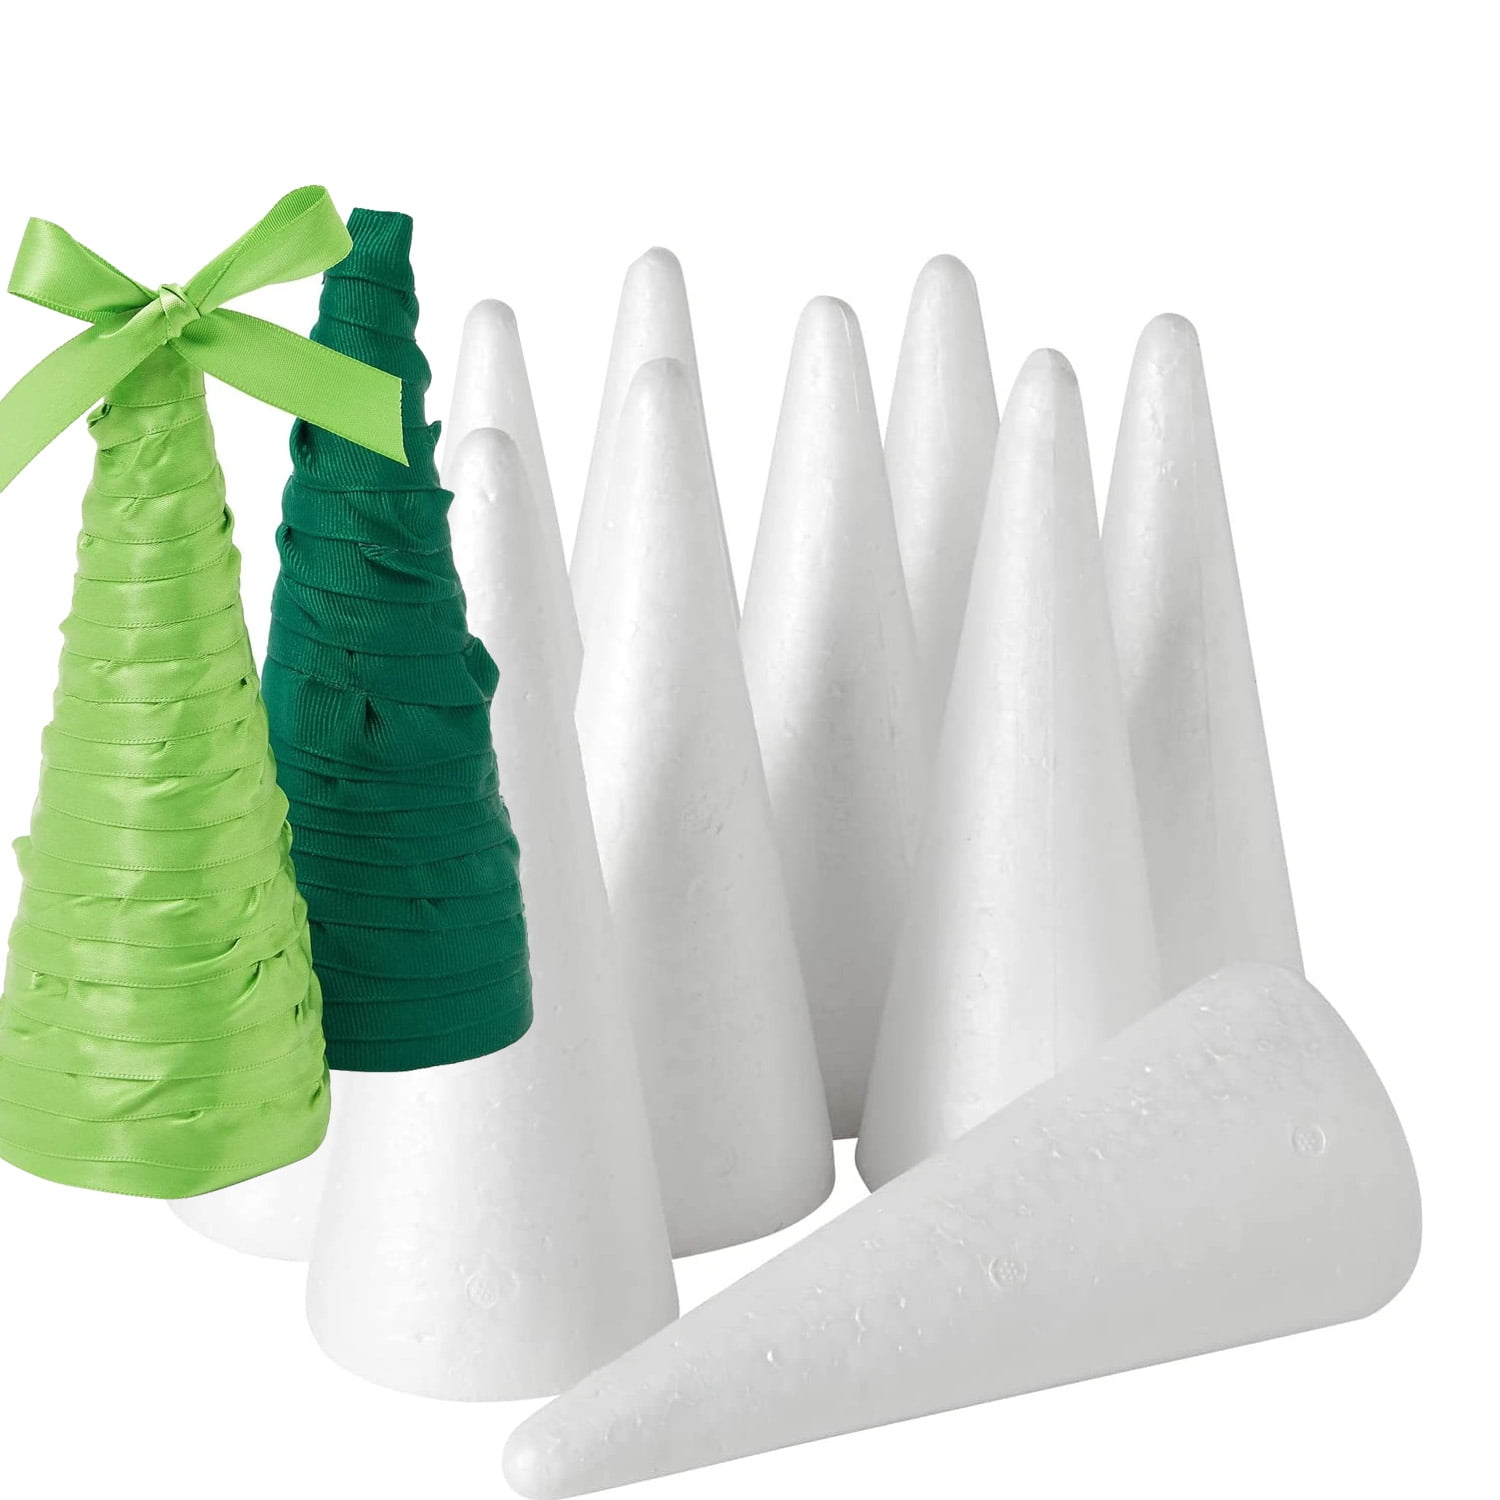  4 Pack Craft Foam - Foam Cones for Crafts, Trees, Holiday  Gnomes, Christmas Decorations, DIY Art Projects (13.5x5.5 in) : Arts,  Crafts & Sewing